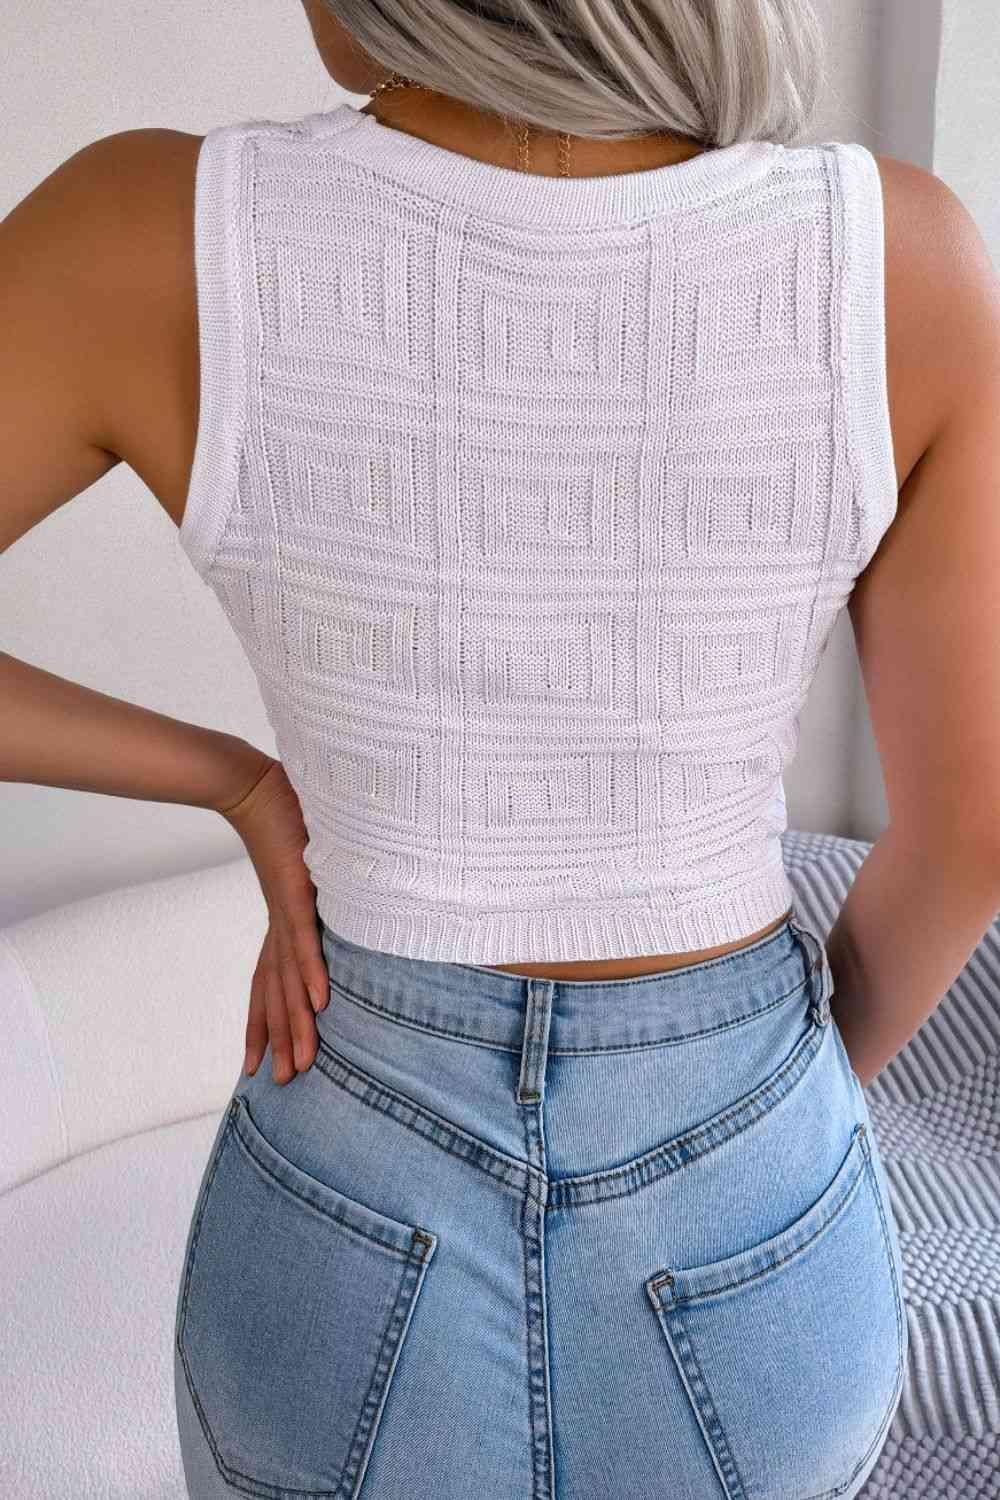 Sexy And Cute Cutout Knitted Sleeveless Top-MXSTUDIO.COM